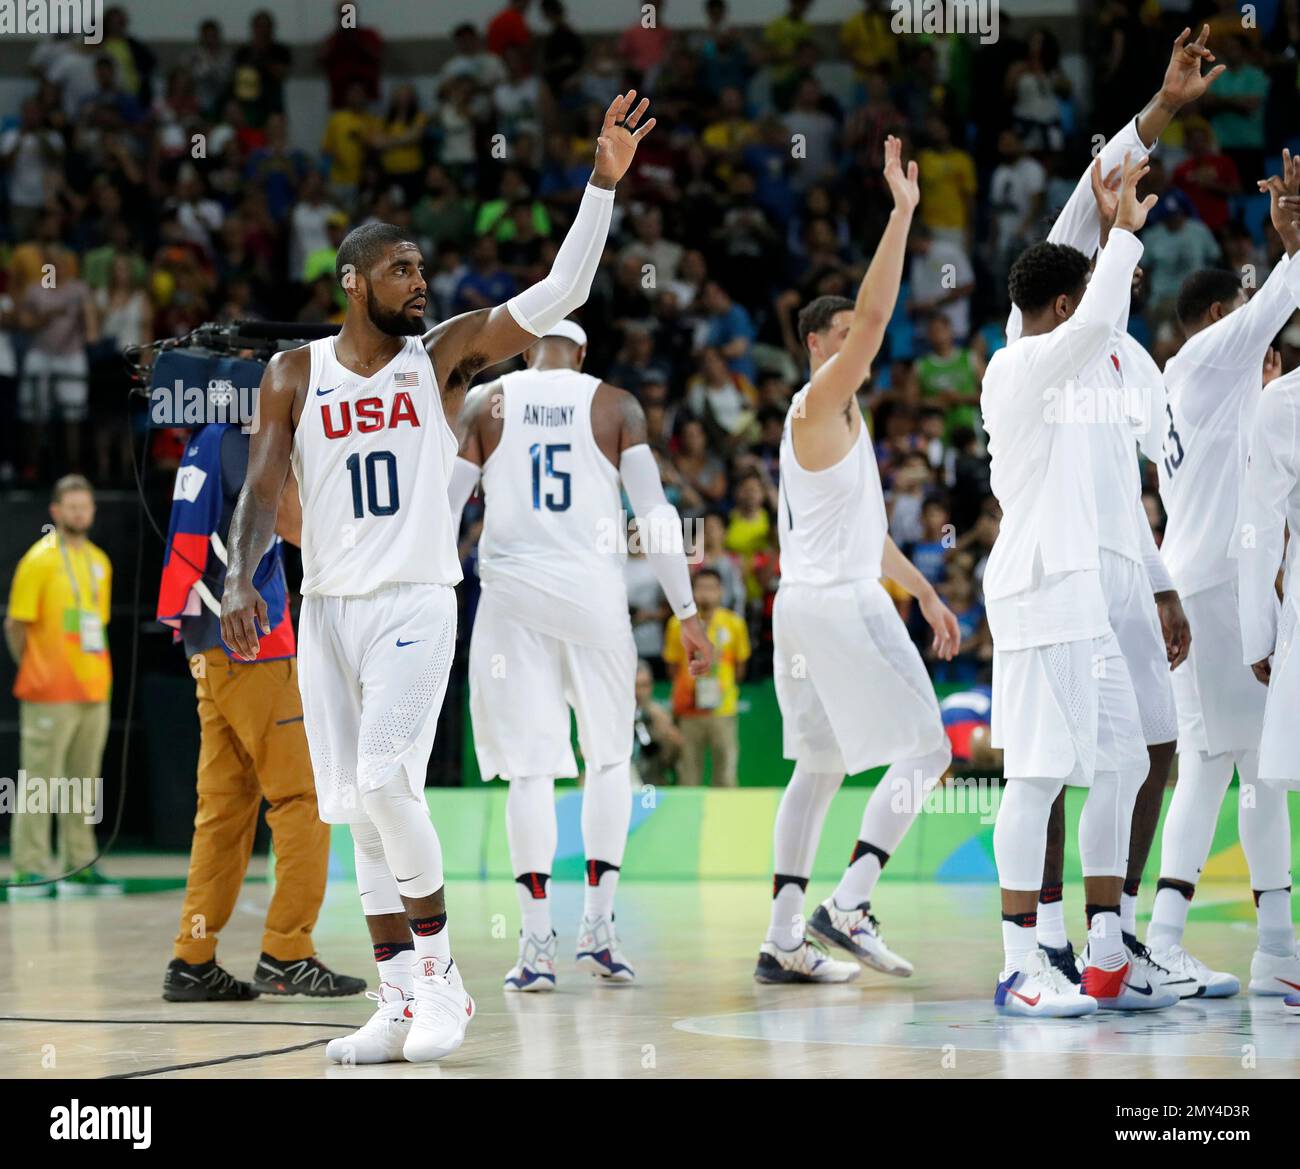 FILE - In this Aug. 14, 2016, file photo, United States' Kyrie Irving (10)  celebrates with teammates after a basketball game against France at the  2016 Summer Olympics in Rio de Janeiro,